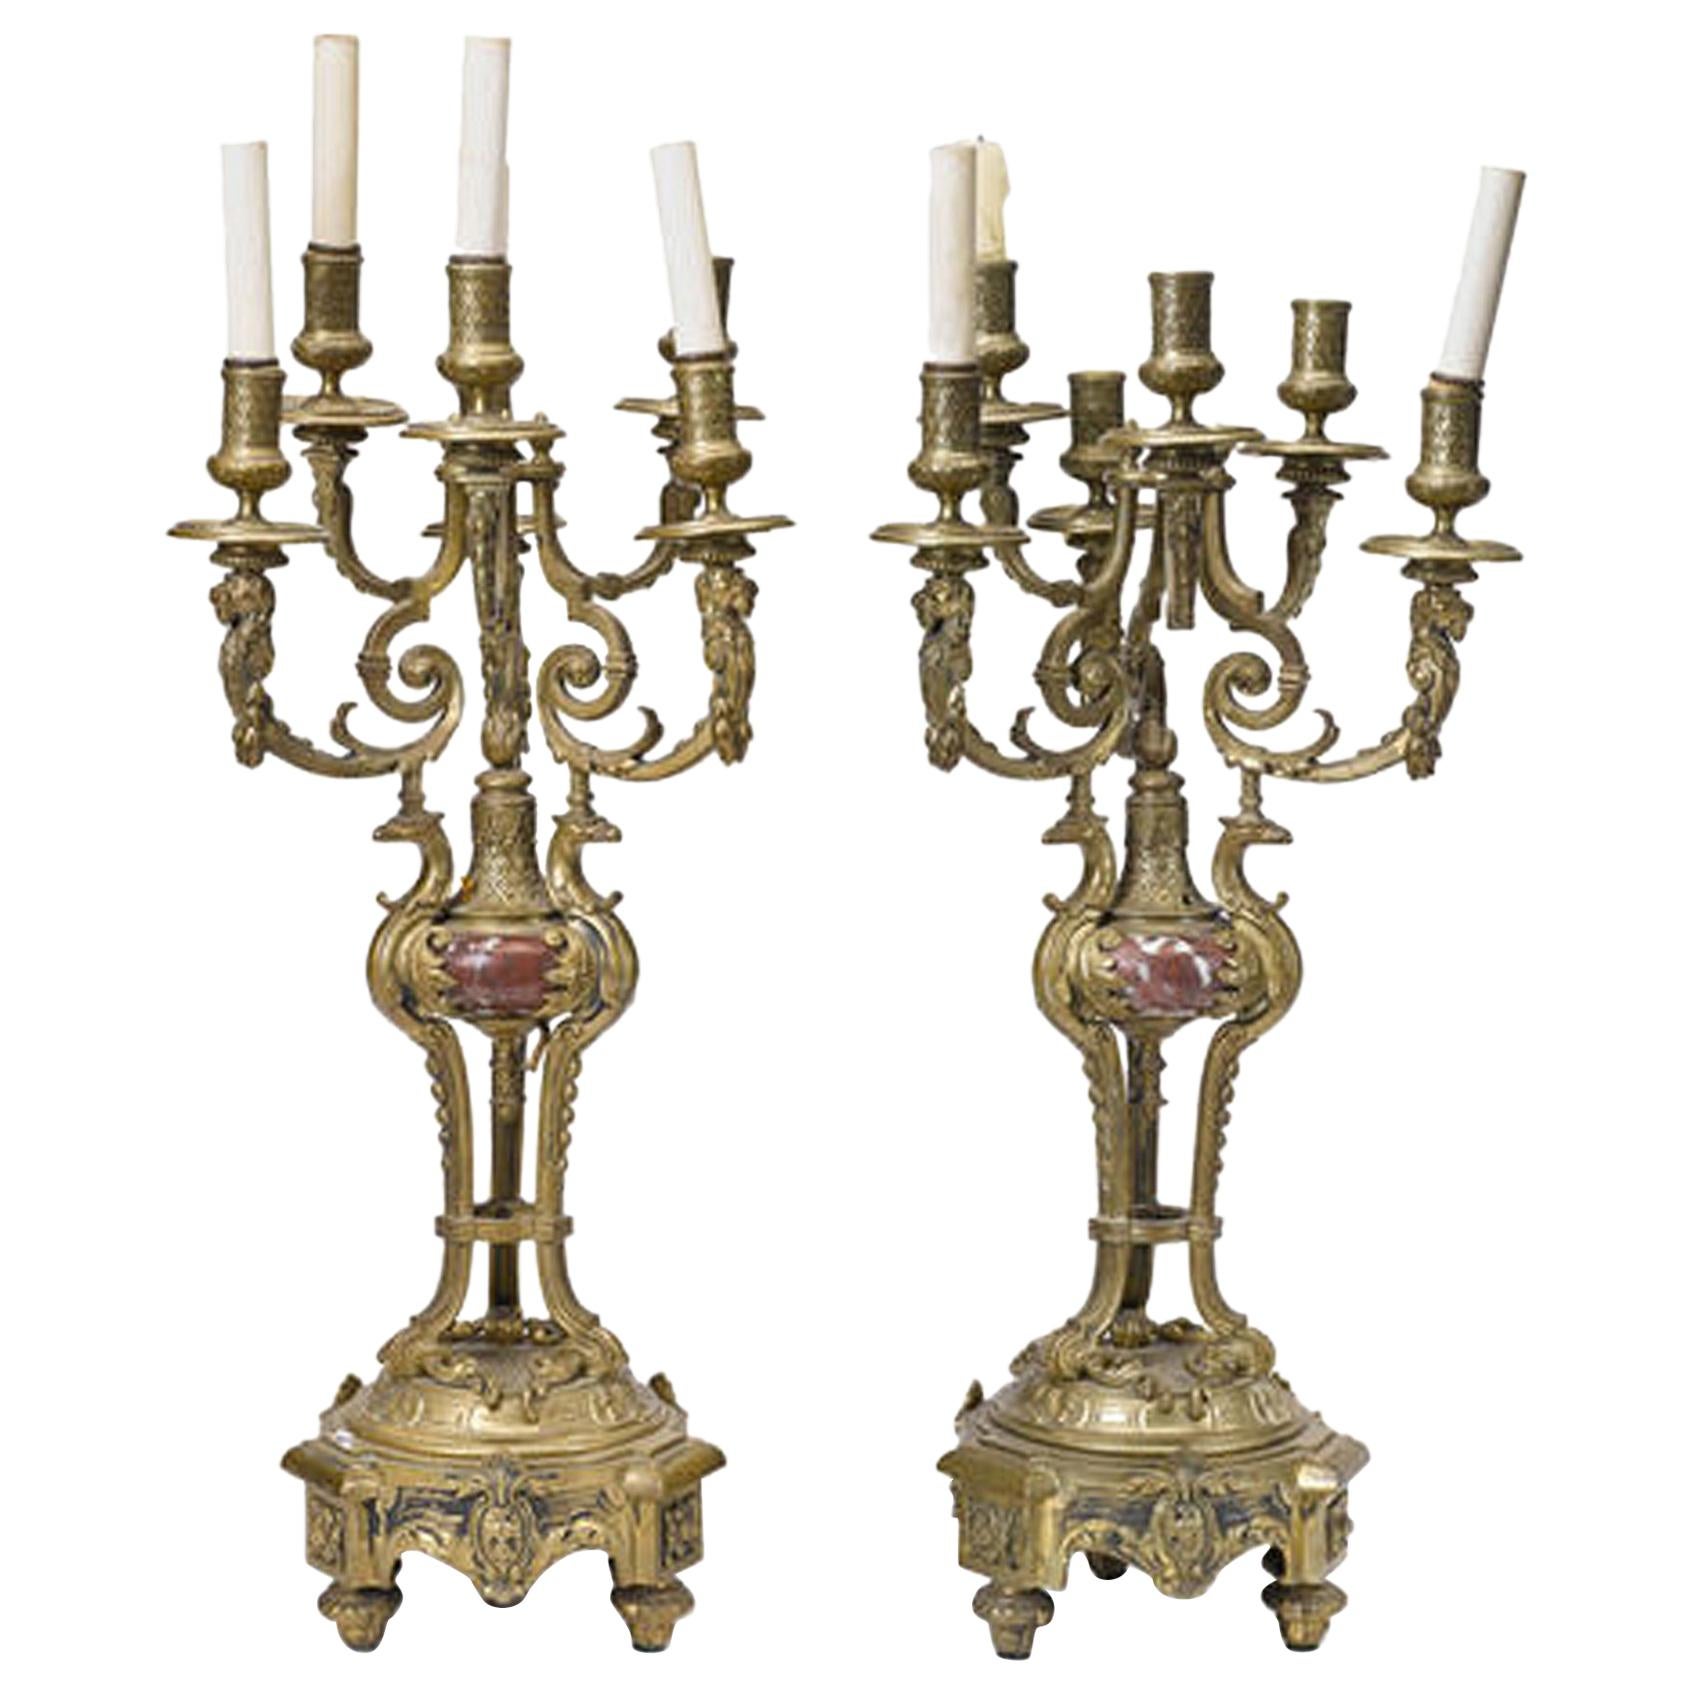 Pair of French Bronze and Rouge Marble Candelabra, 19th Century